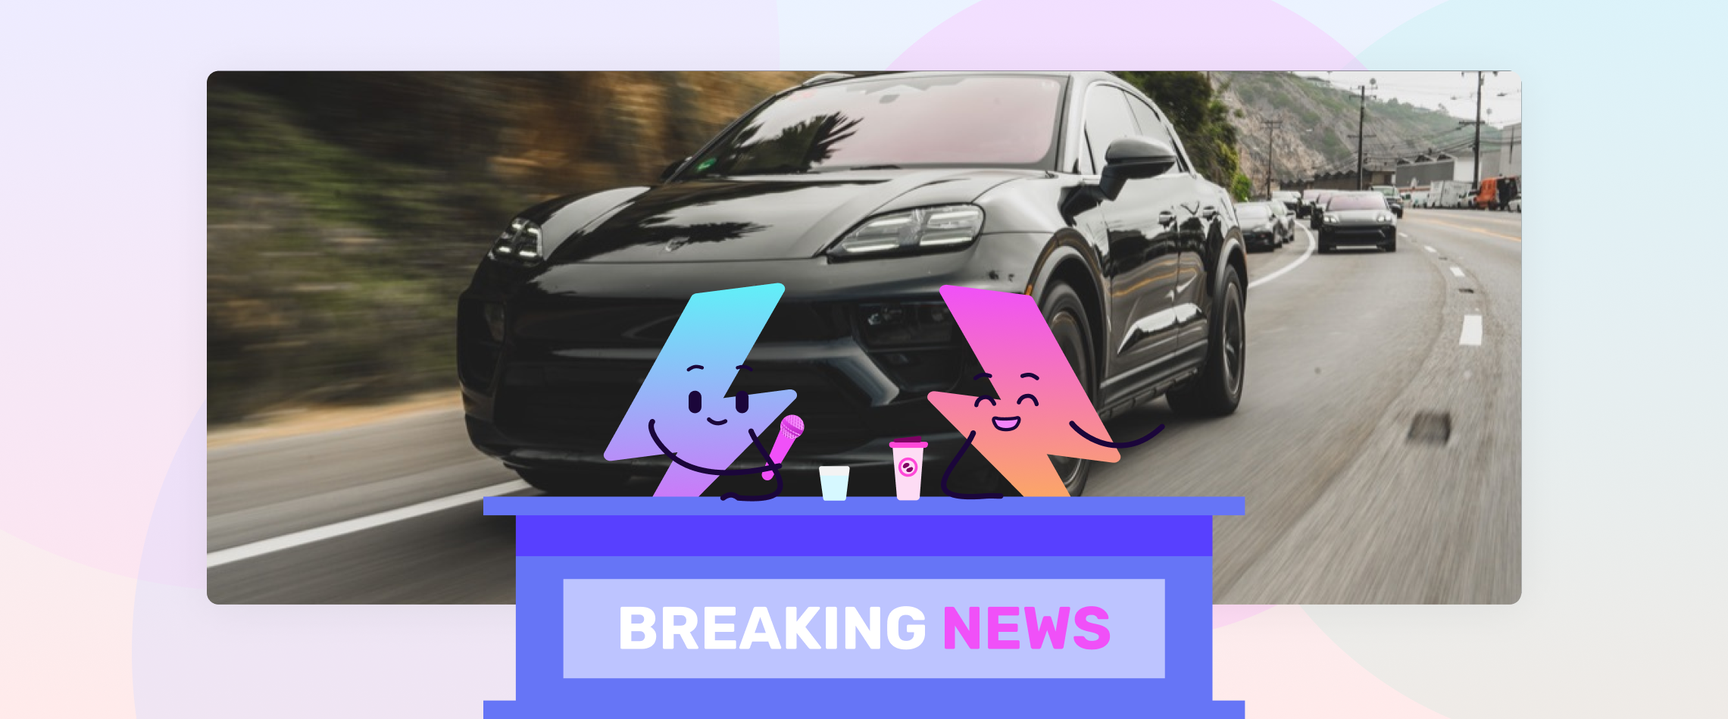 A blog feature image featuring an animated news desk with two bolt characters as hosts. A Porsche Maycan EV is the topic of conversation according to the highlight image in the background